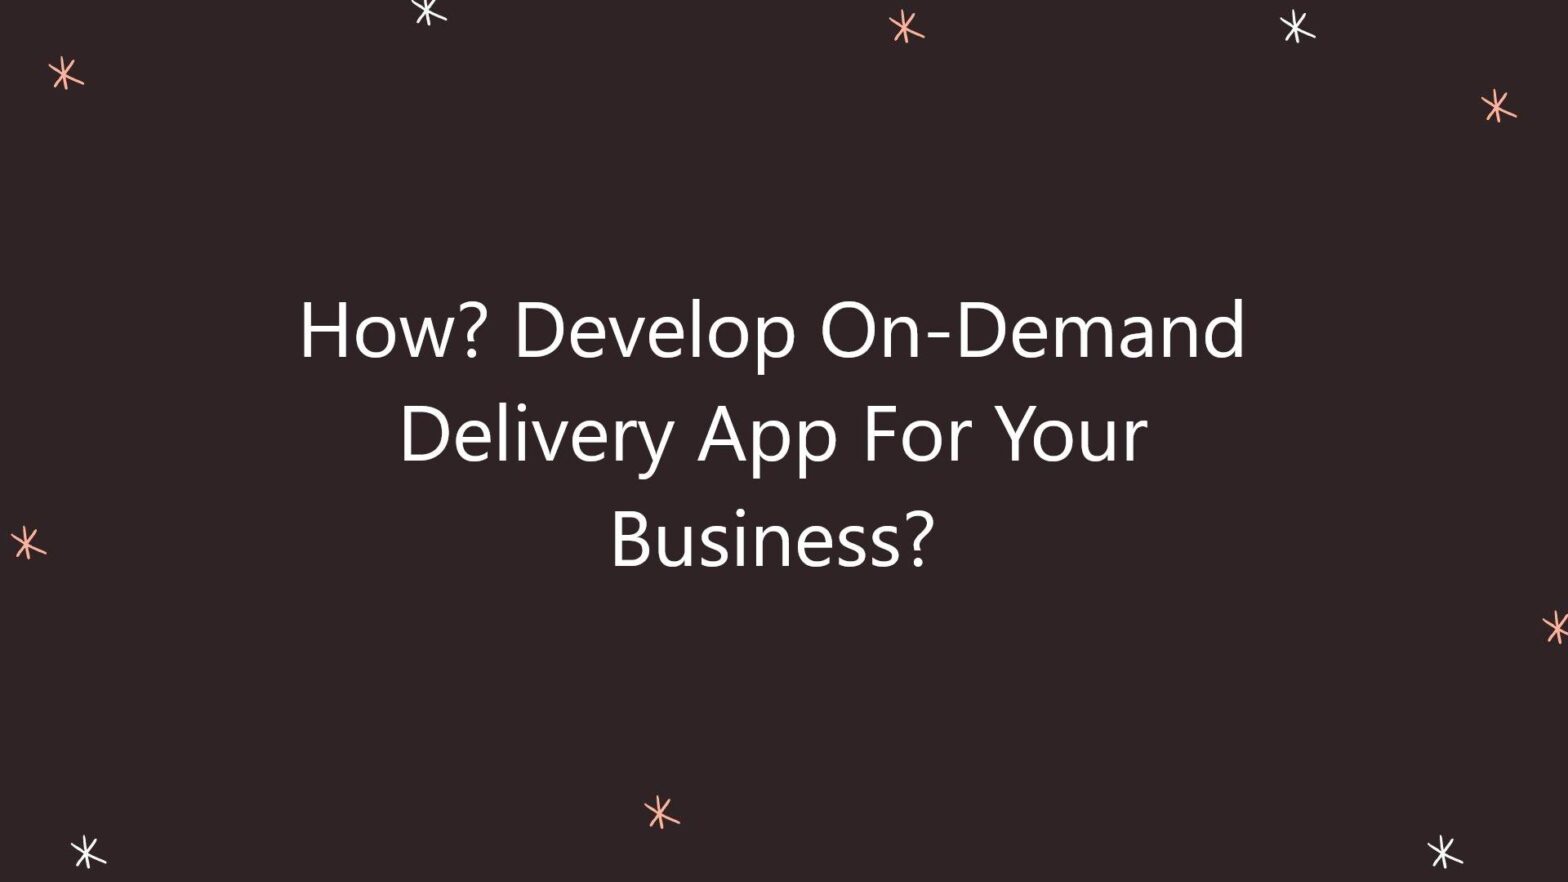 How? Develop On-Demand Delivery App For Your Business?